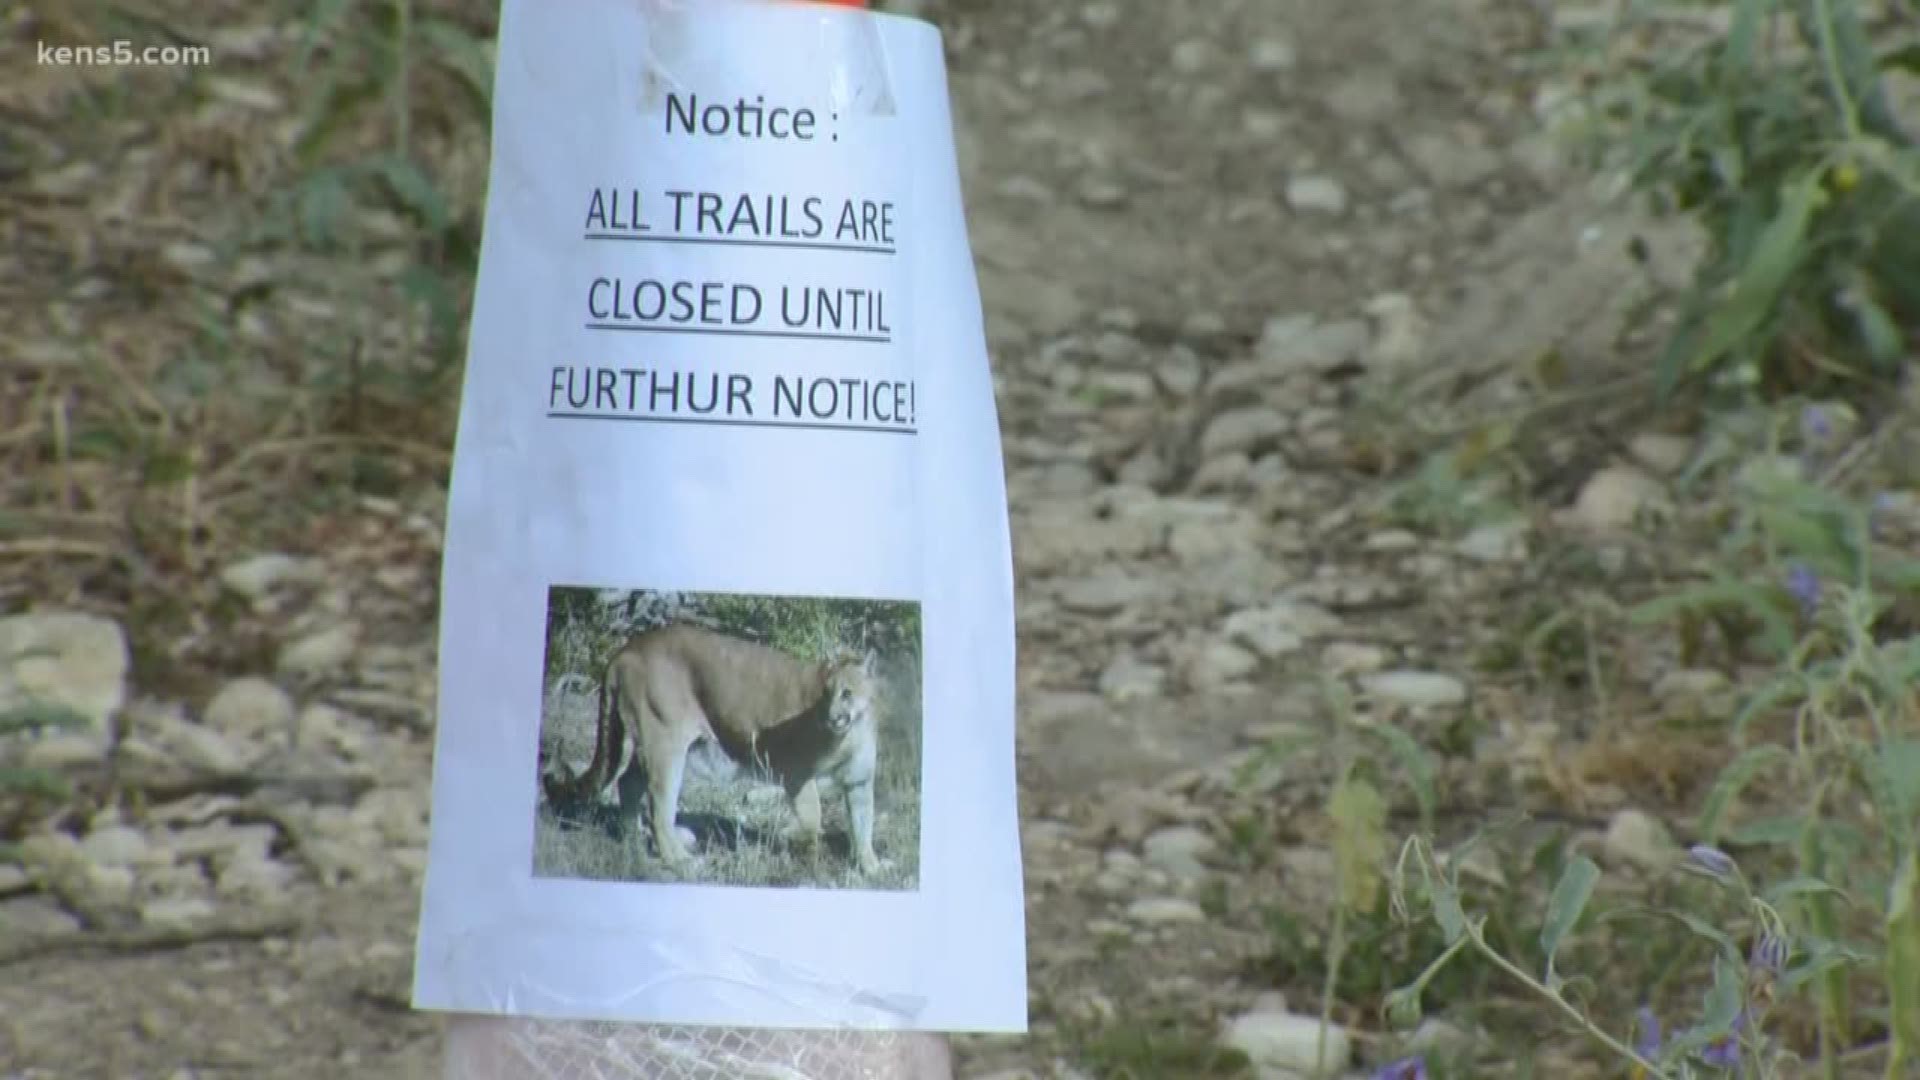 Texas Parks and Wildlife is working on the situation involving a young mountain lion.